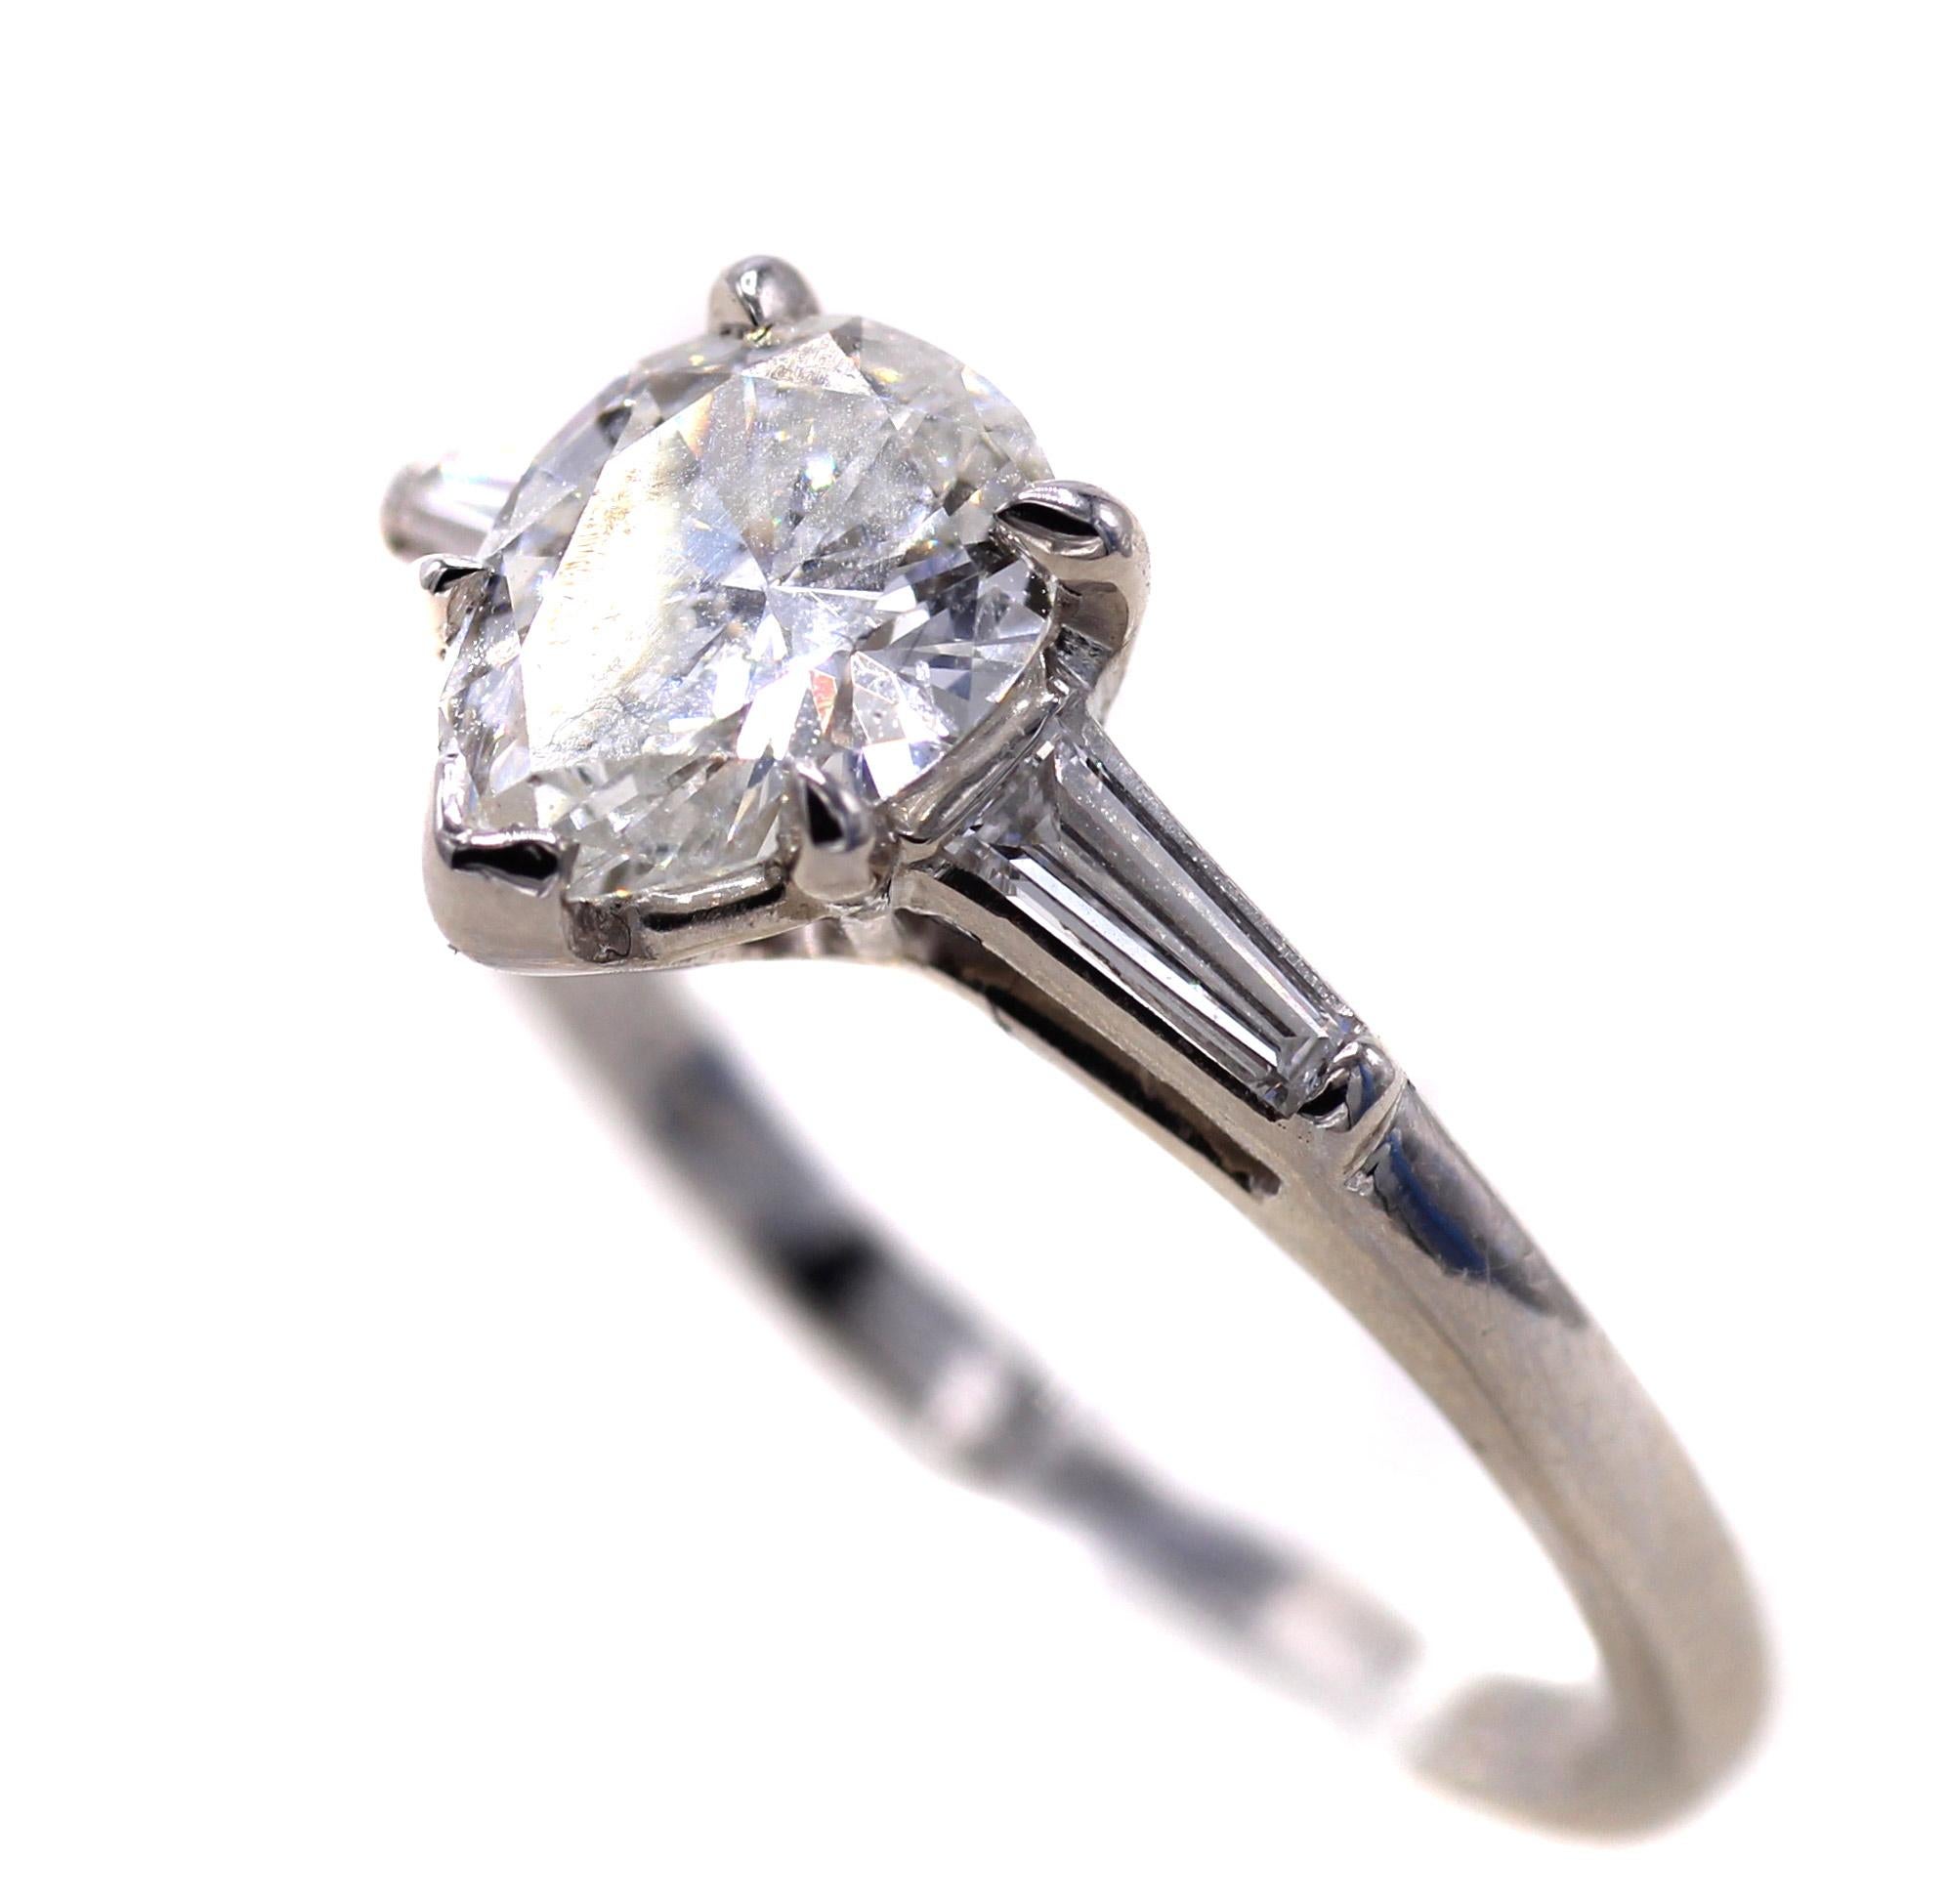 1 carat pear shape diamond is set in a handcrafted platinum mounting set with 2 white bright tapered baguette cut diamonds. The pear shape is accompanied by a report from the GIA giving the diamond a color grade of H and a clarity of I1. The